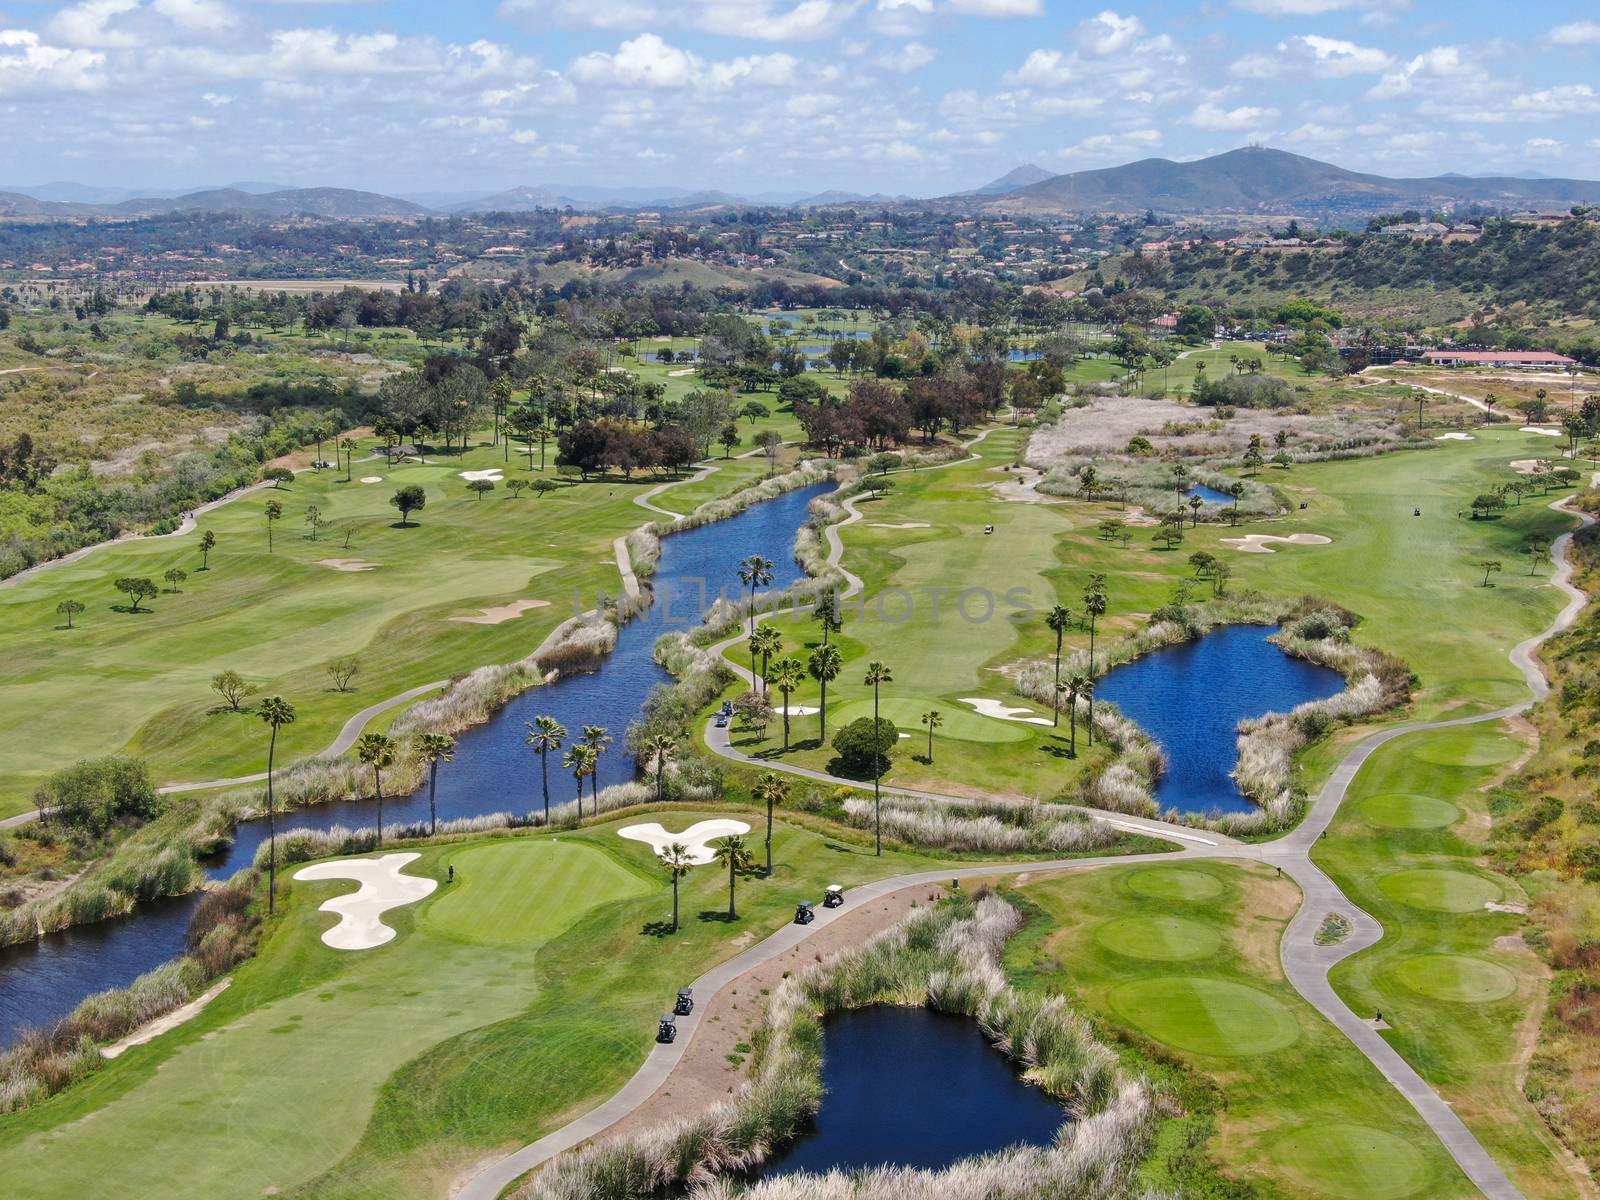 Aerial view of a green golf course in South California by Bonandbon